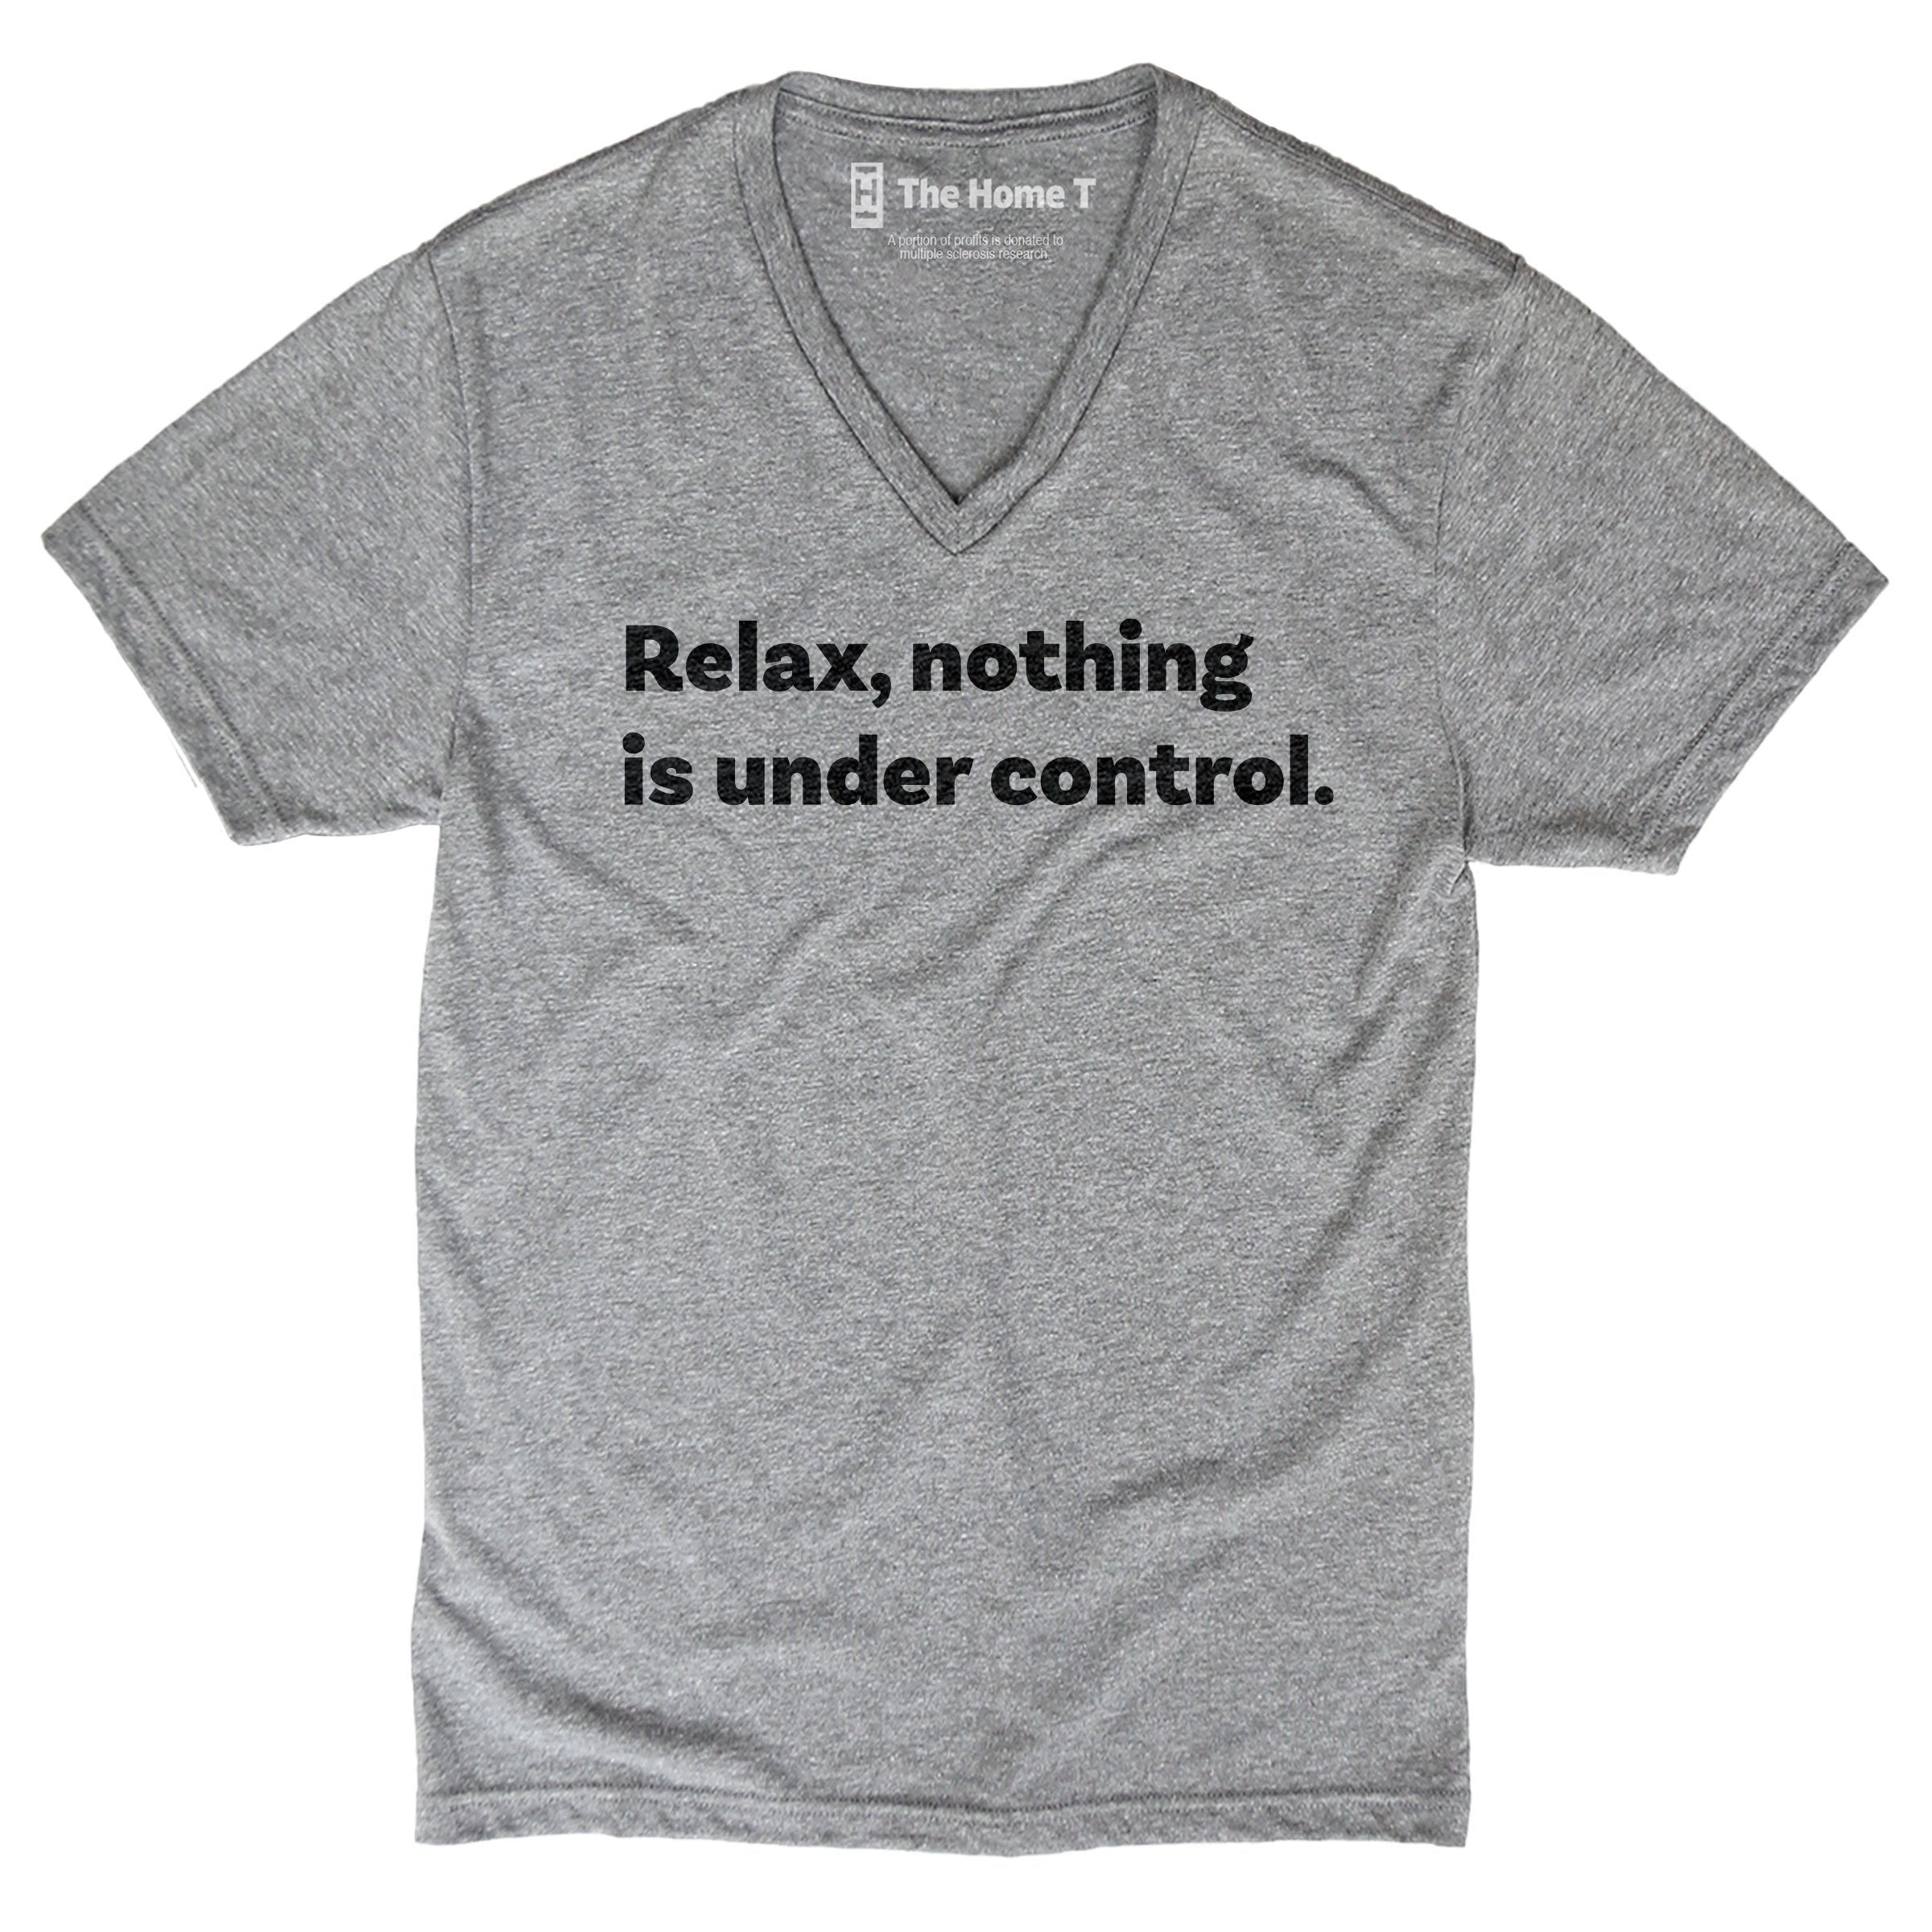 Relax, Nothing Is Under Control. The Home T XS VNECK 